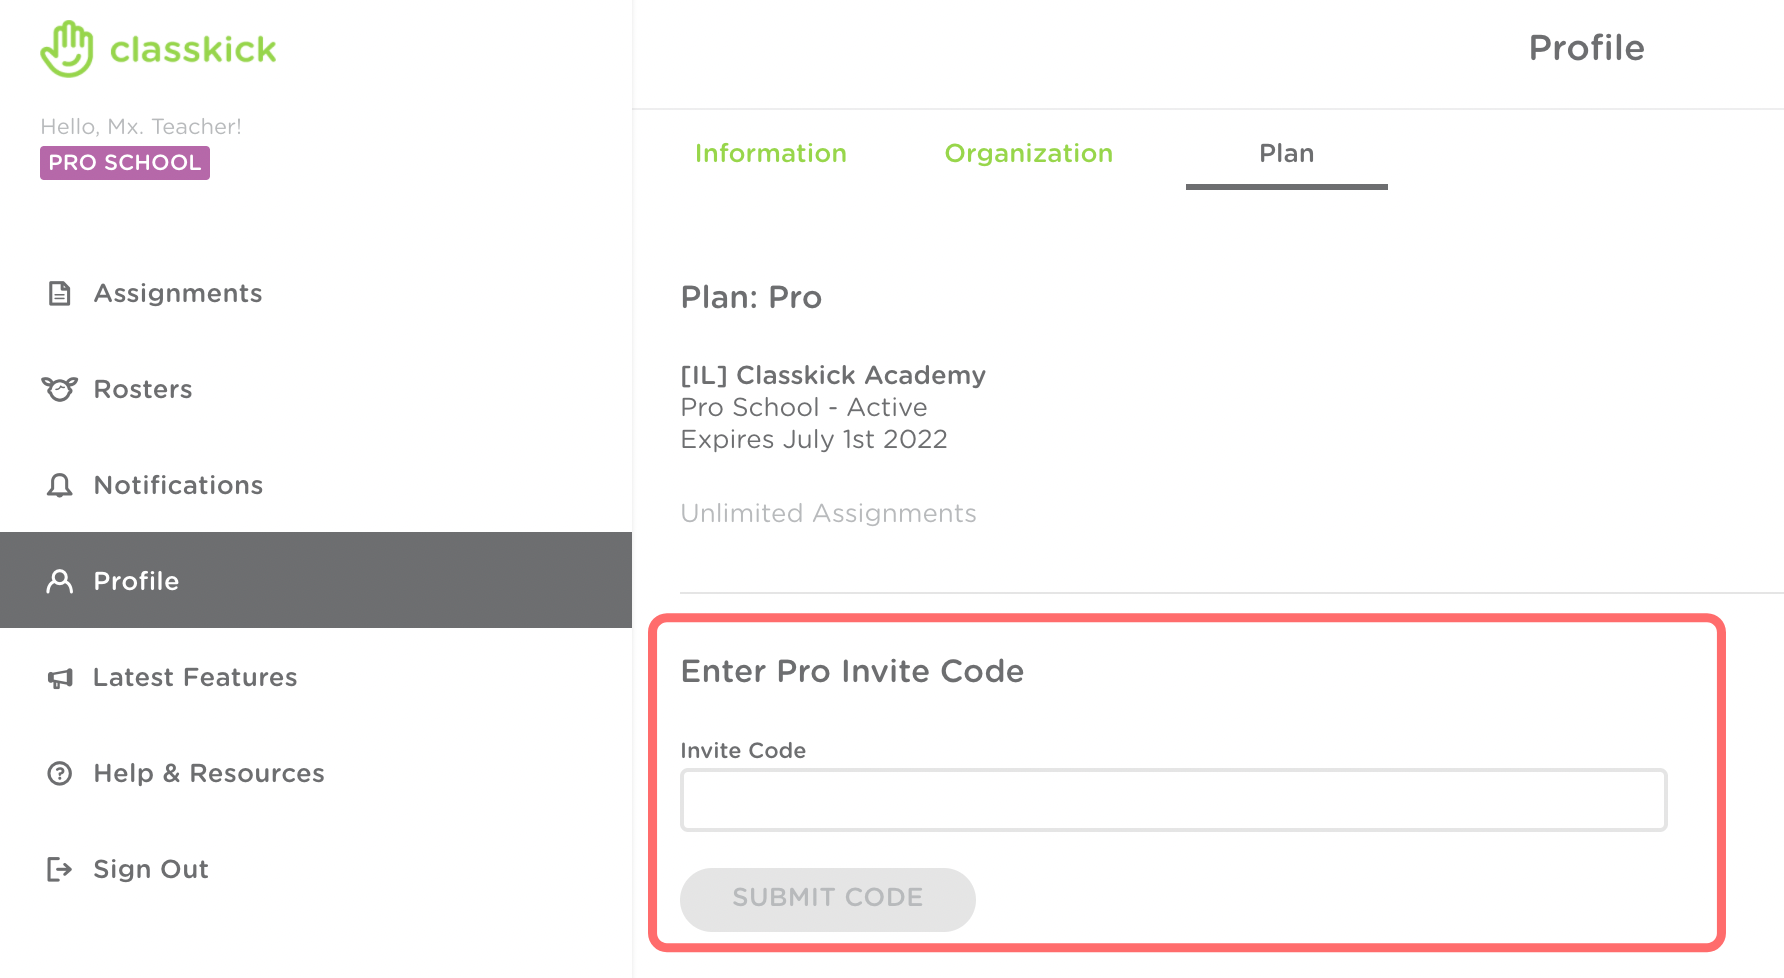 Teacher Profile and Plan tab is displayed. The text box for the teacher to input the Pro Invite Code is highlighted.